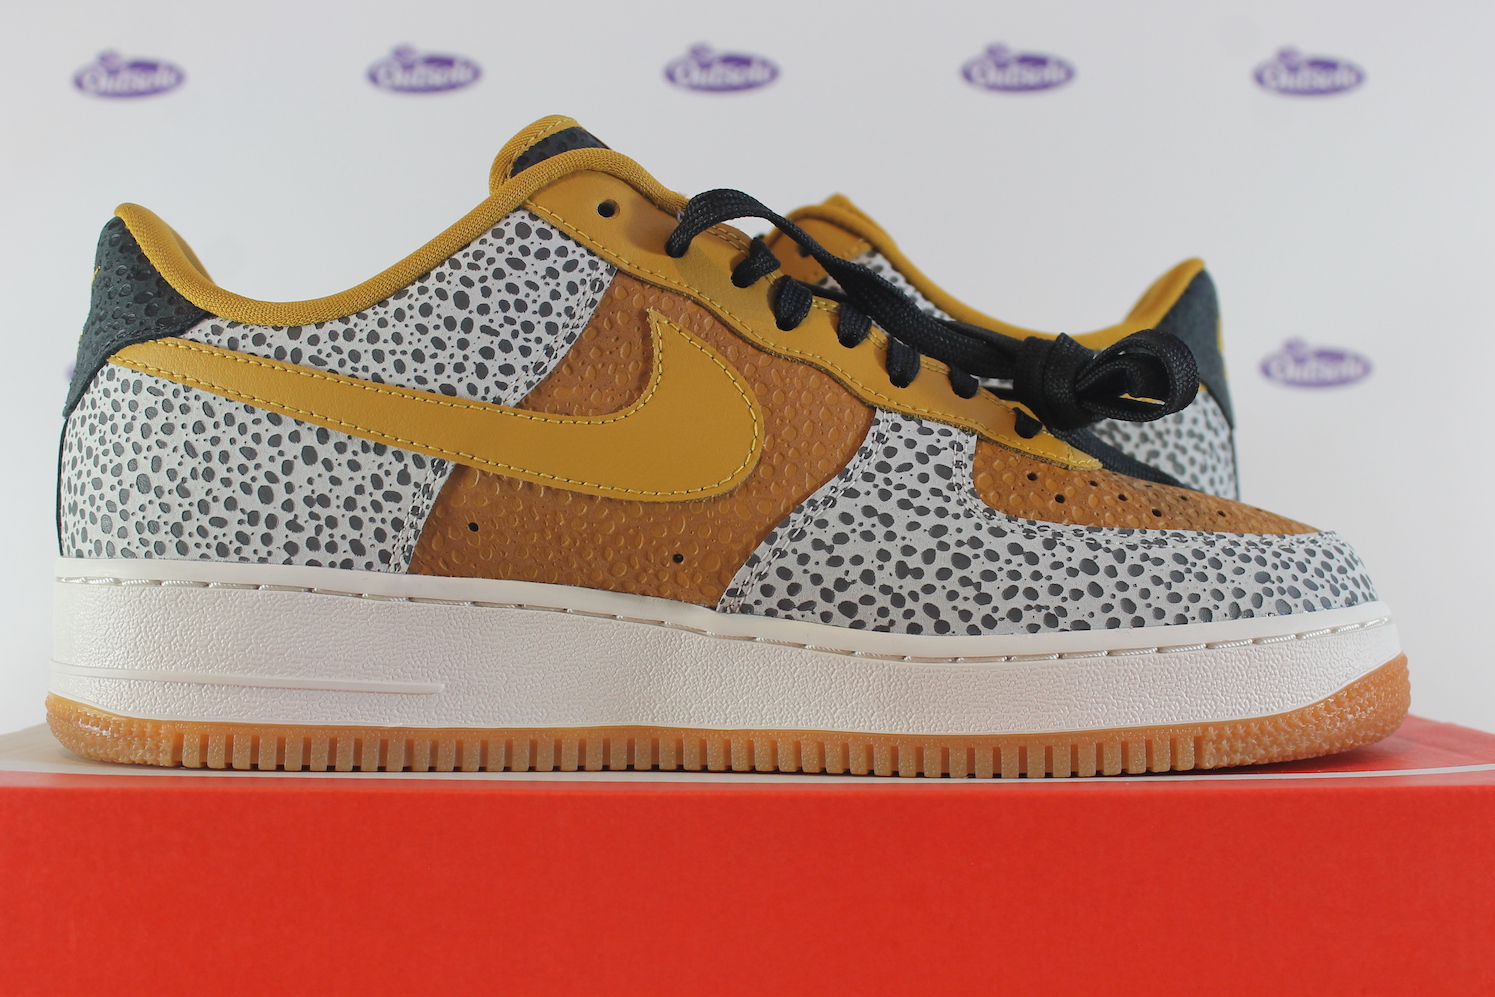 Exclusivo Persona responsable aventuras Nike Air Force 1 By You (ID) Premium Safari • ✓ In stock at Outsole